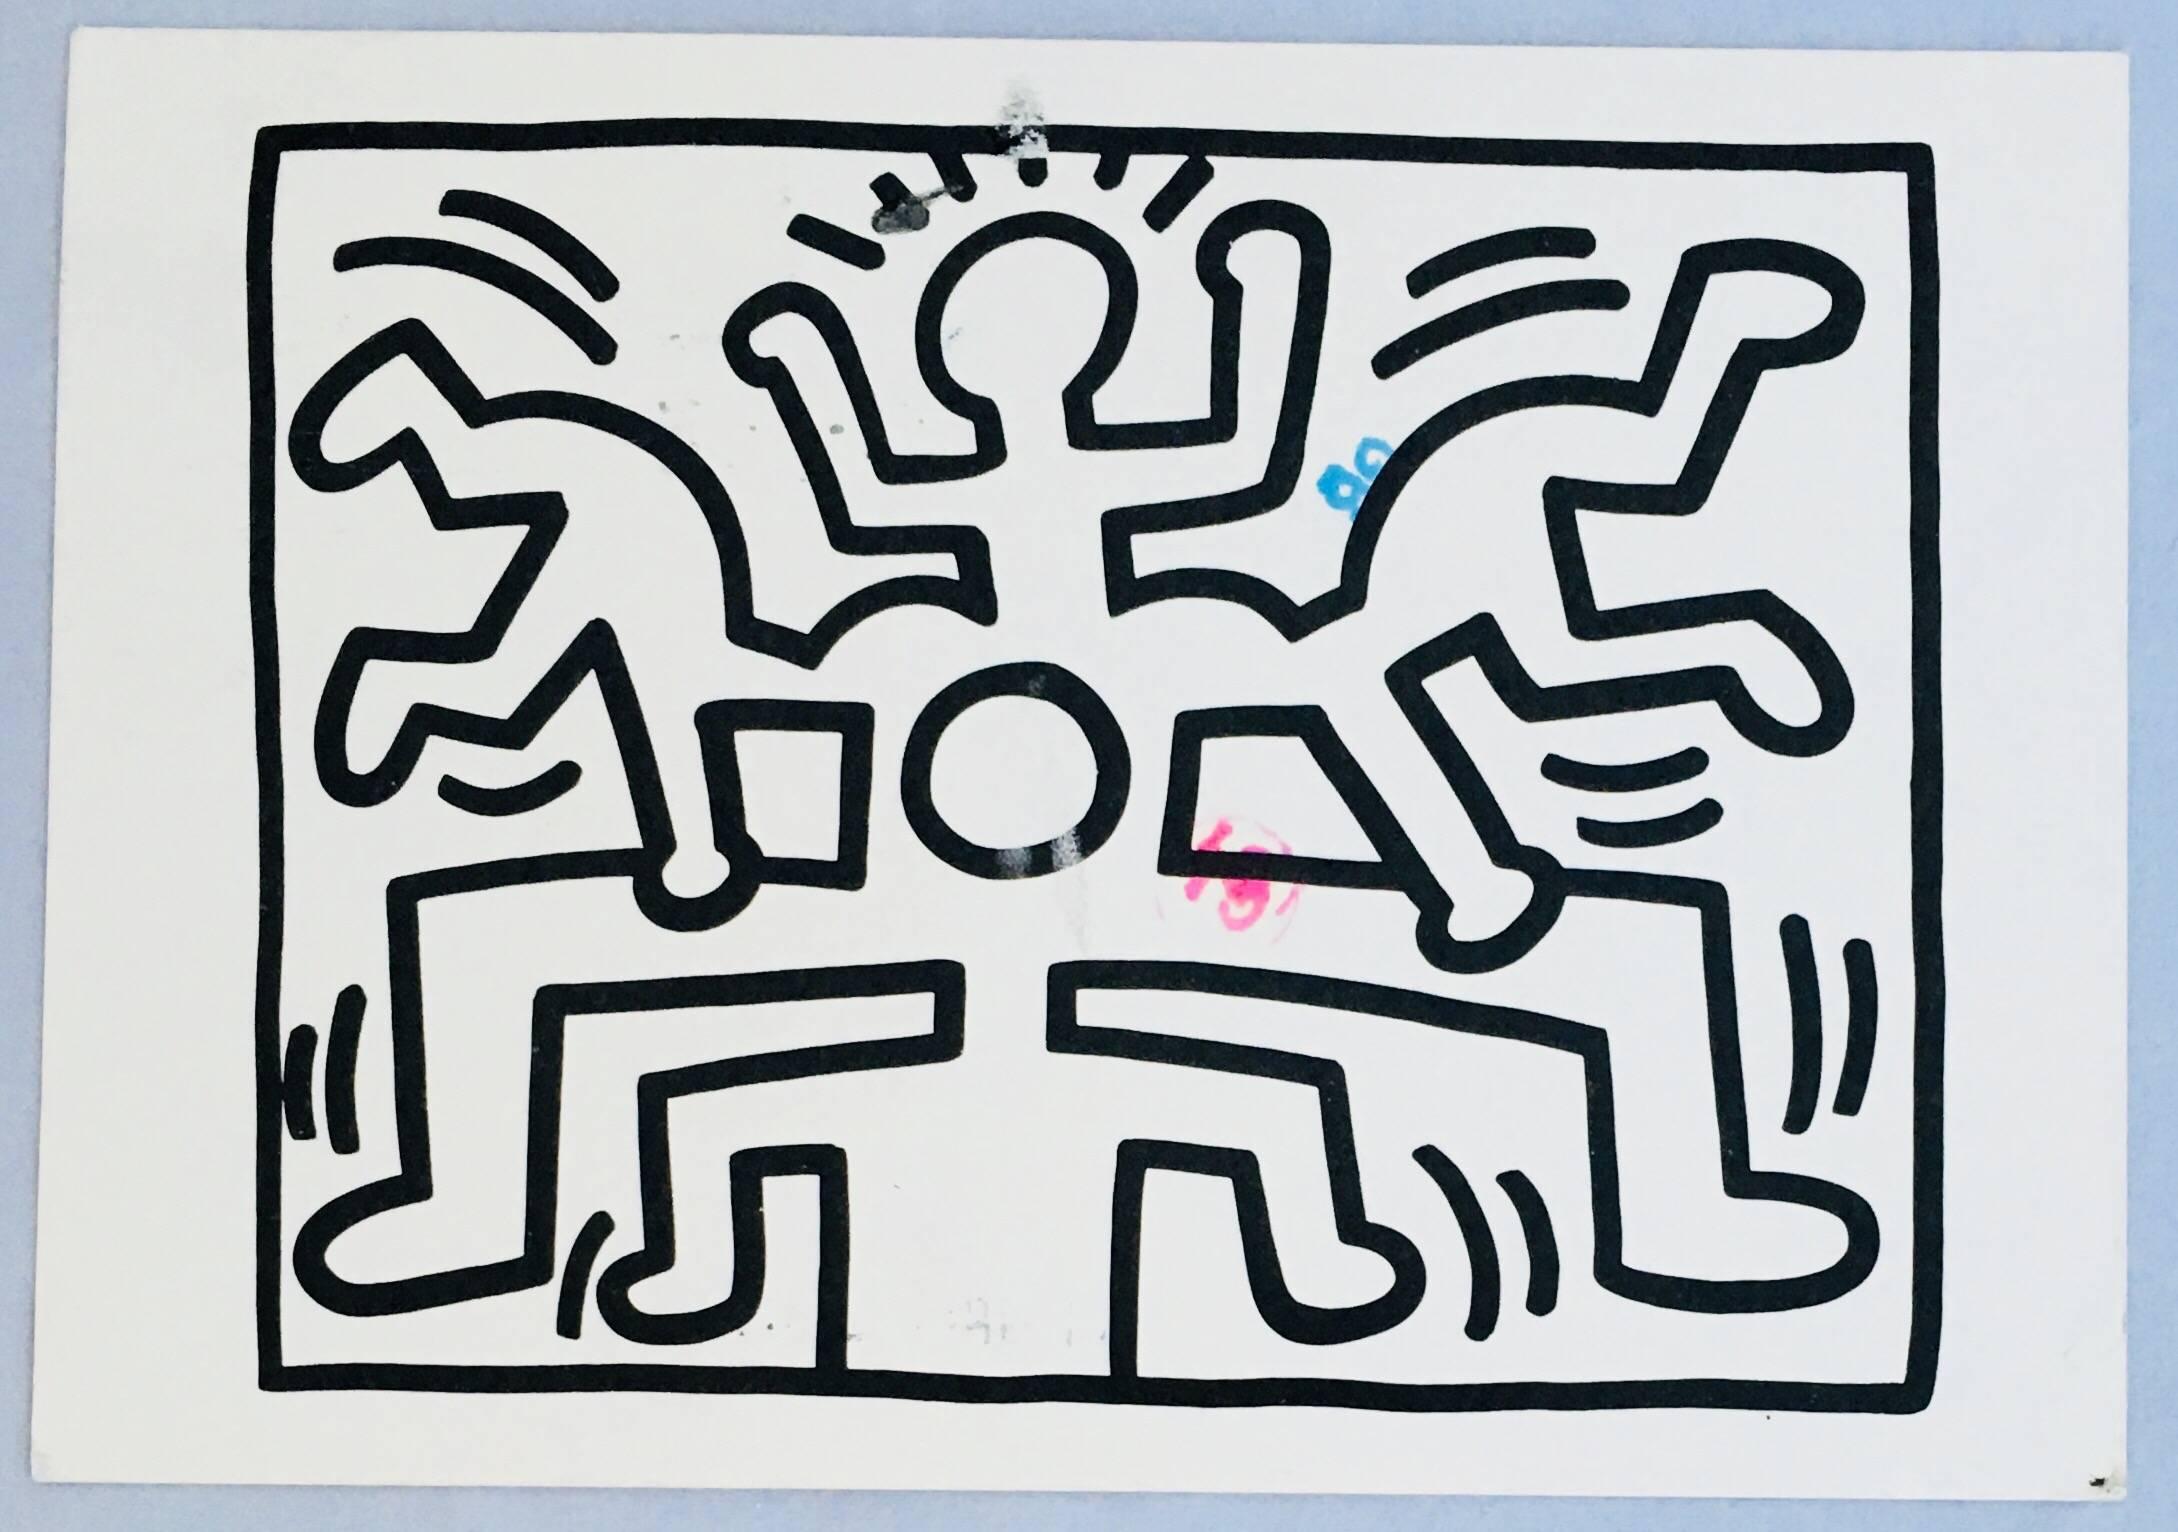 A set of two vintage Haring announcement cards for the exhibitions:

Haring future Primeval at the Queens Museum, New York, 1990
&
Keith Haring at Michael Kohn Gallery, Los Angeles, 1988

Offset print on cardstock
Measures: 4.5 x 6.5 & 4.25 x